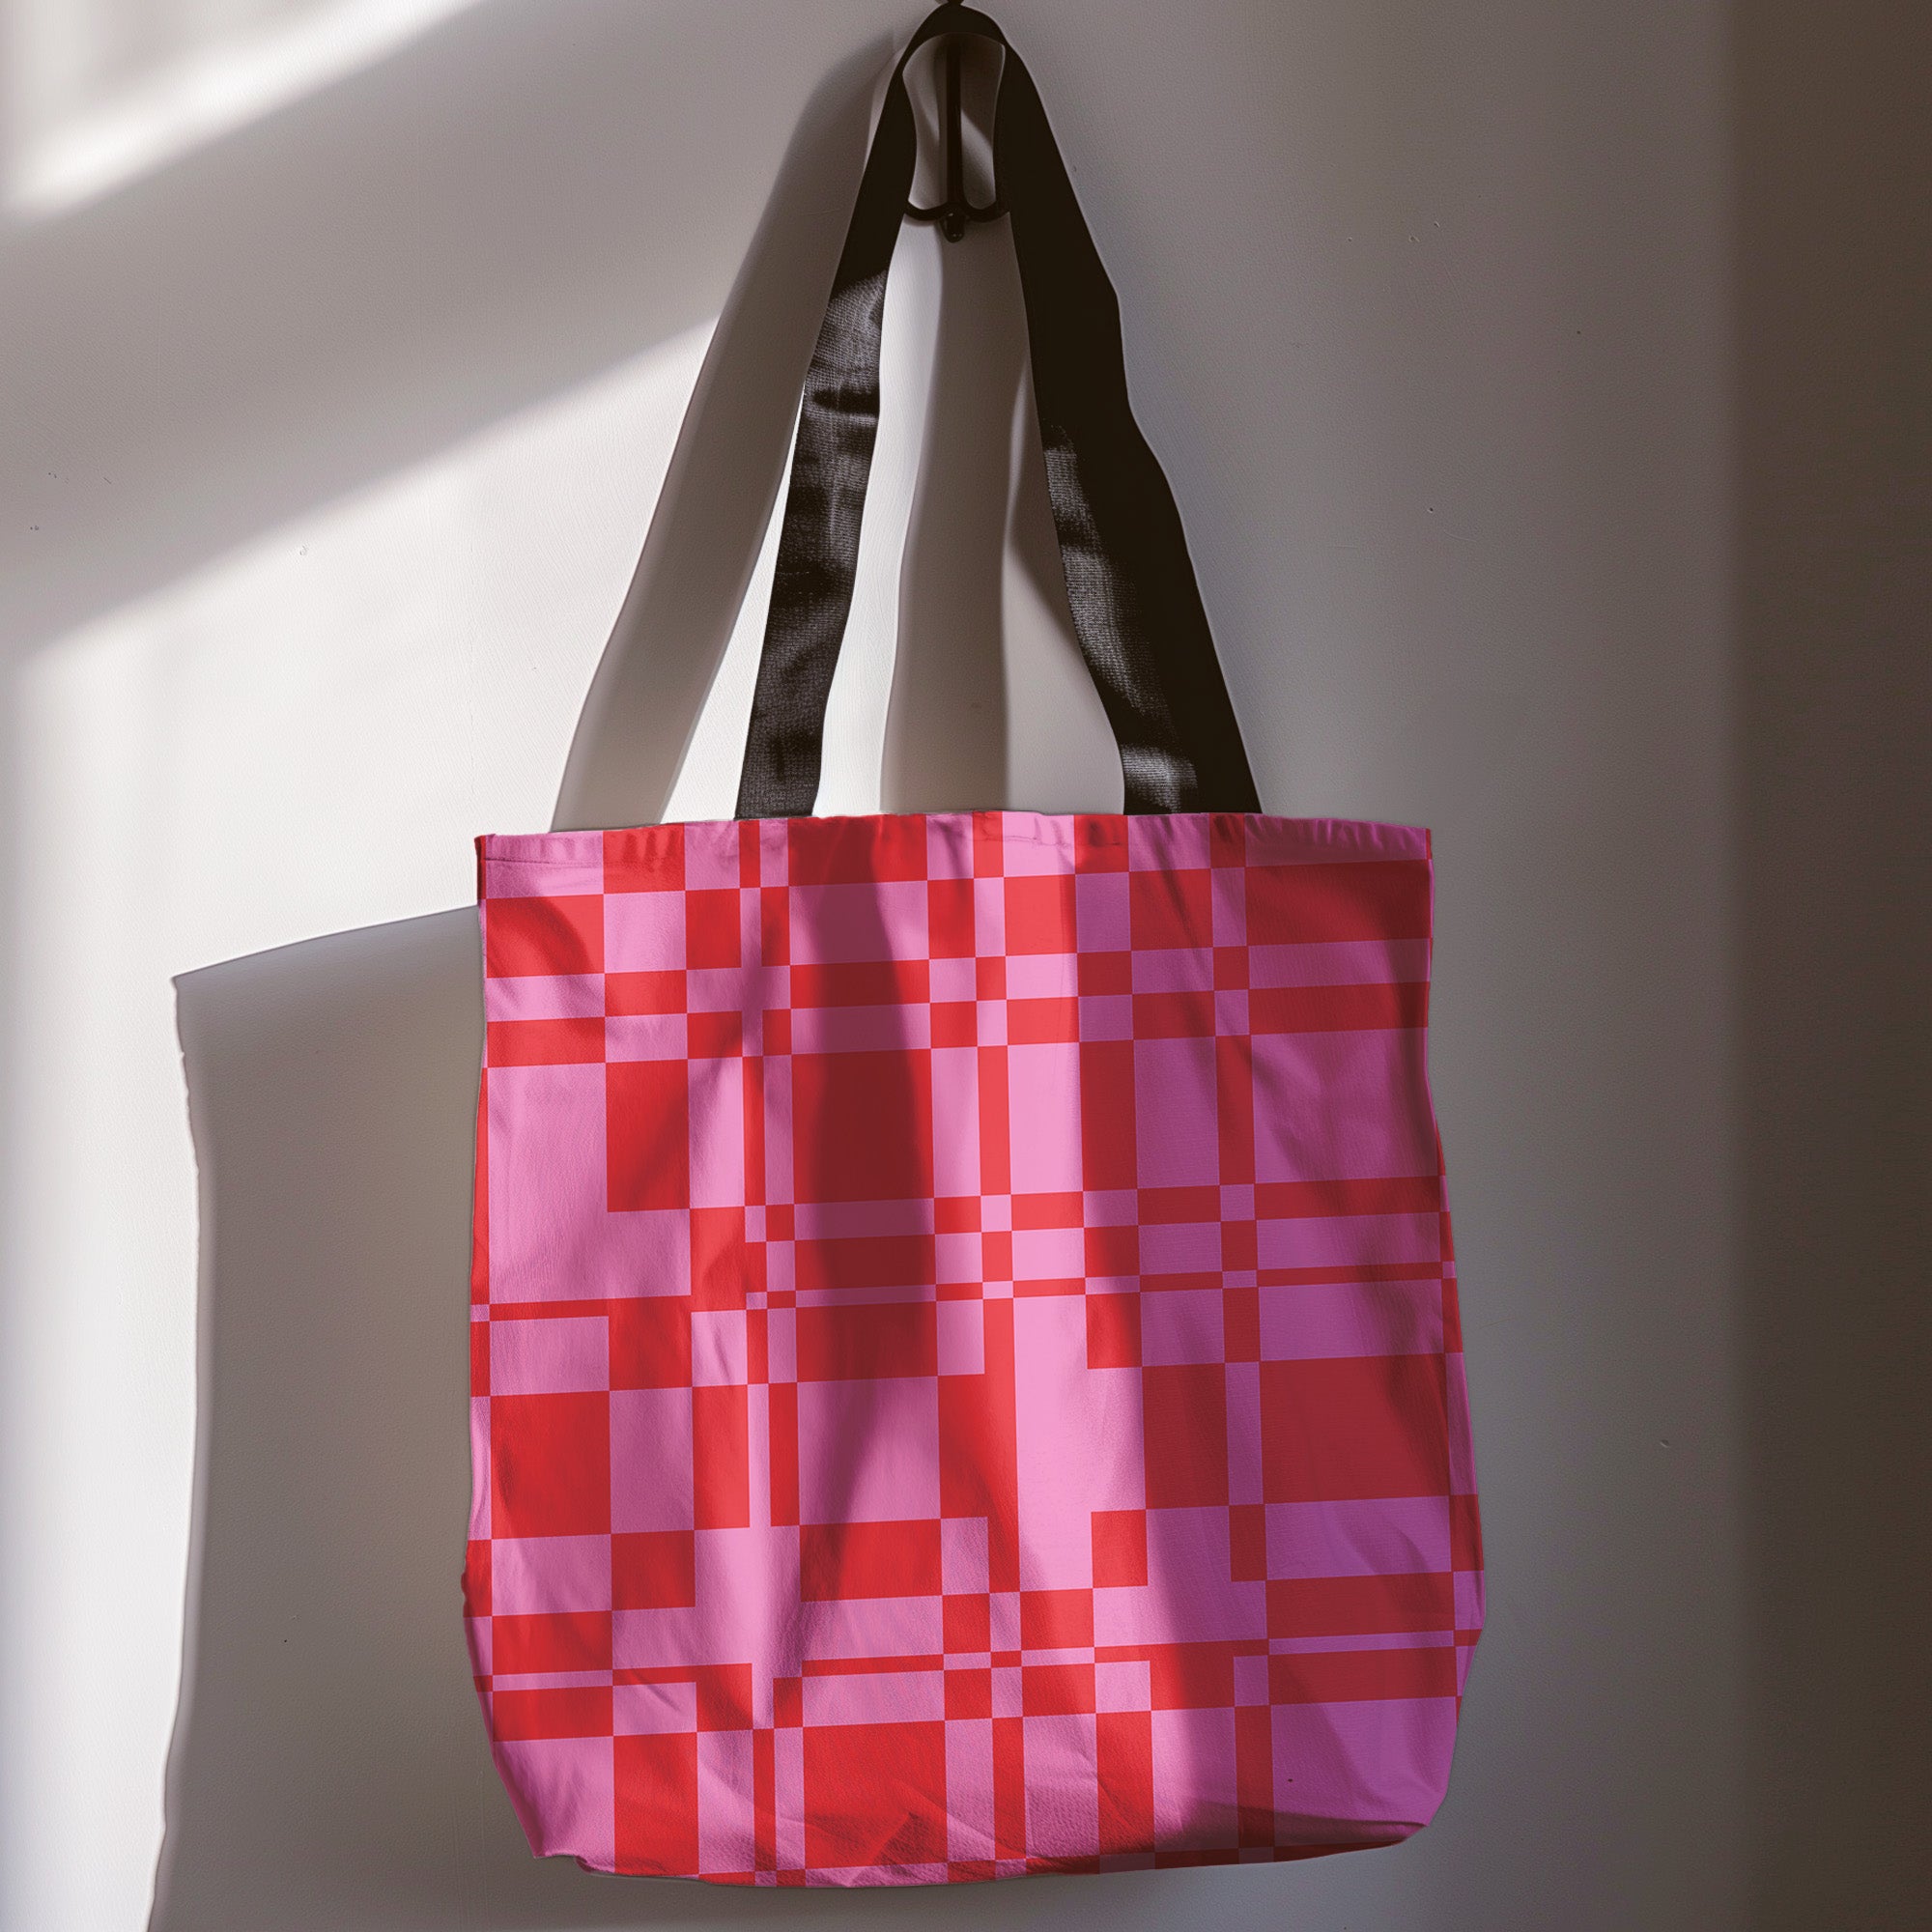 Squared Away Tote in Sunset Candy Red and Pink